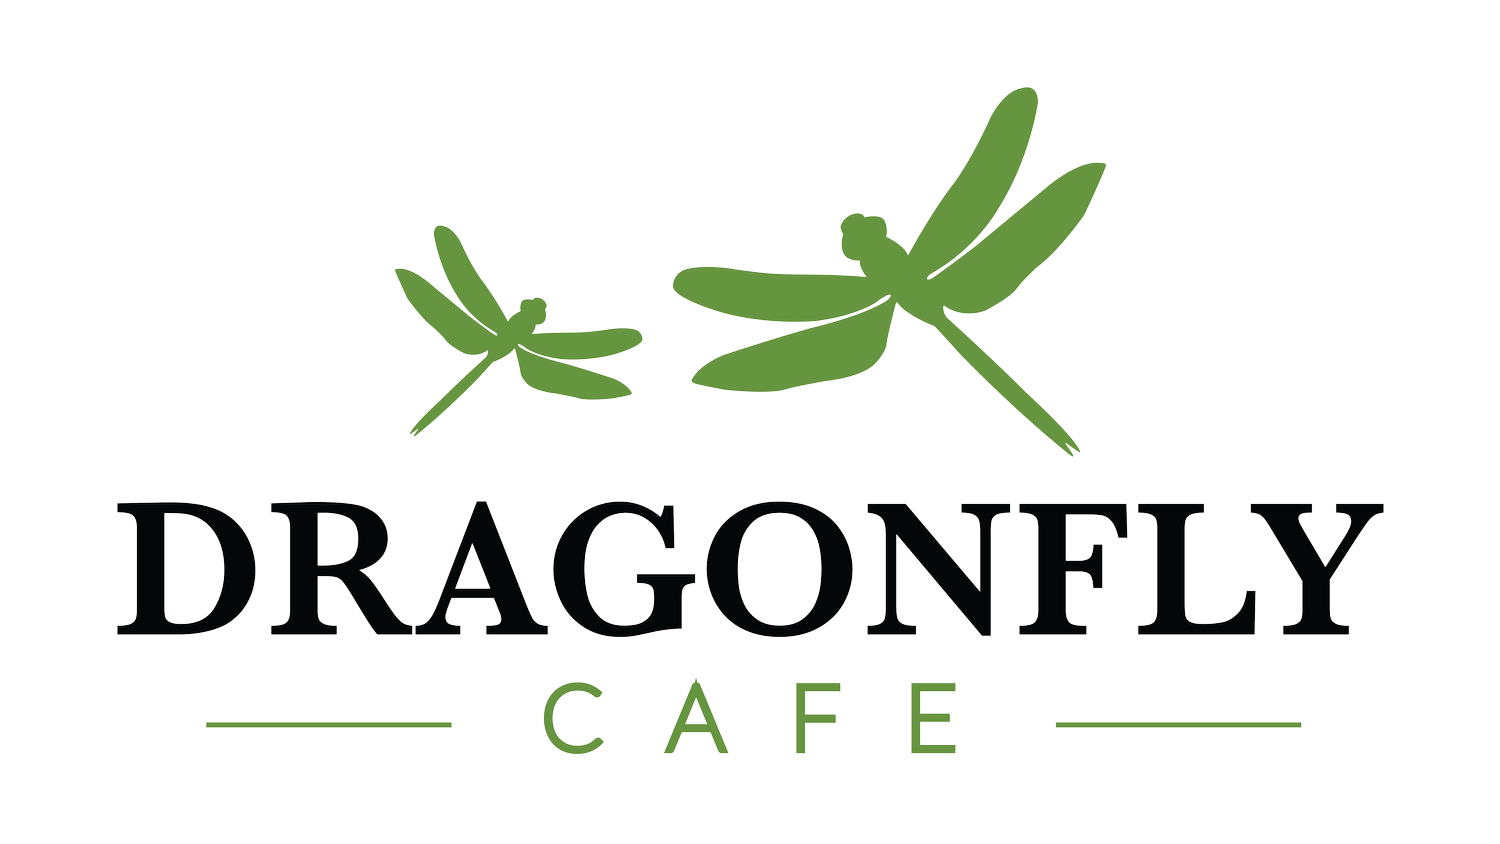 Dragonfly Cafe Meal Service